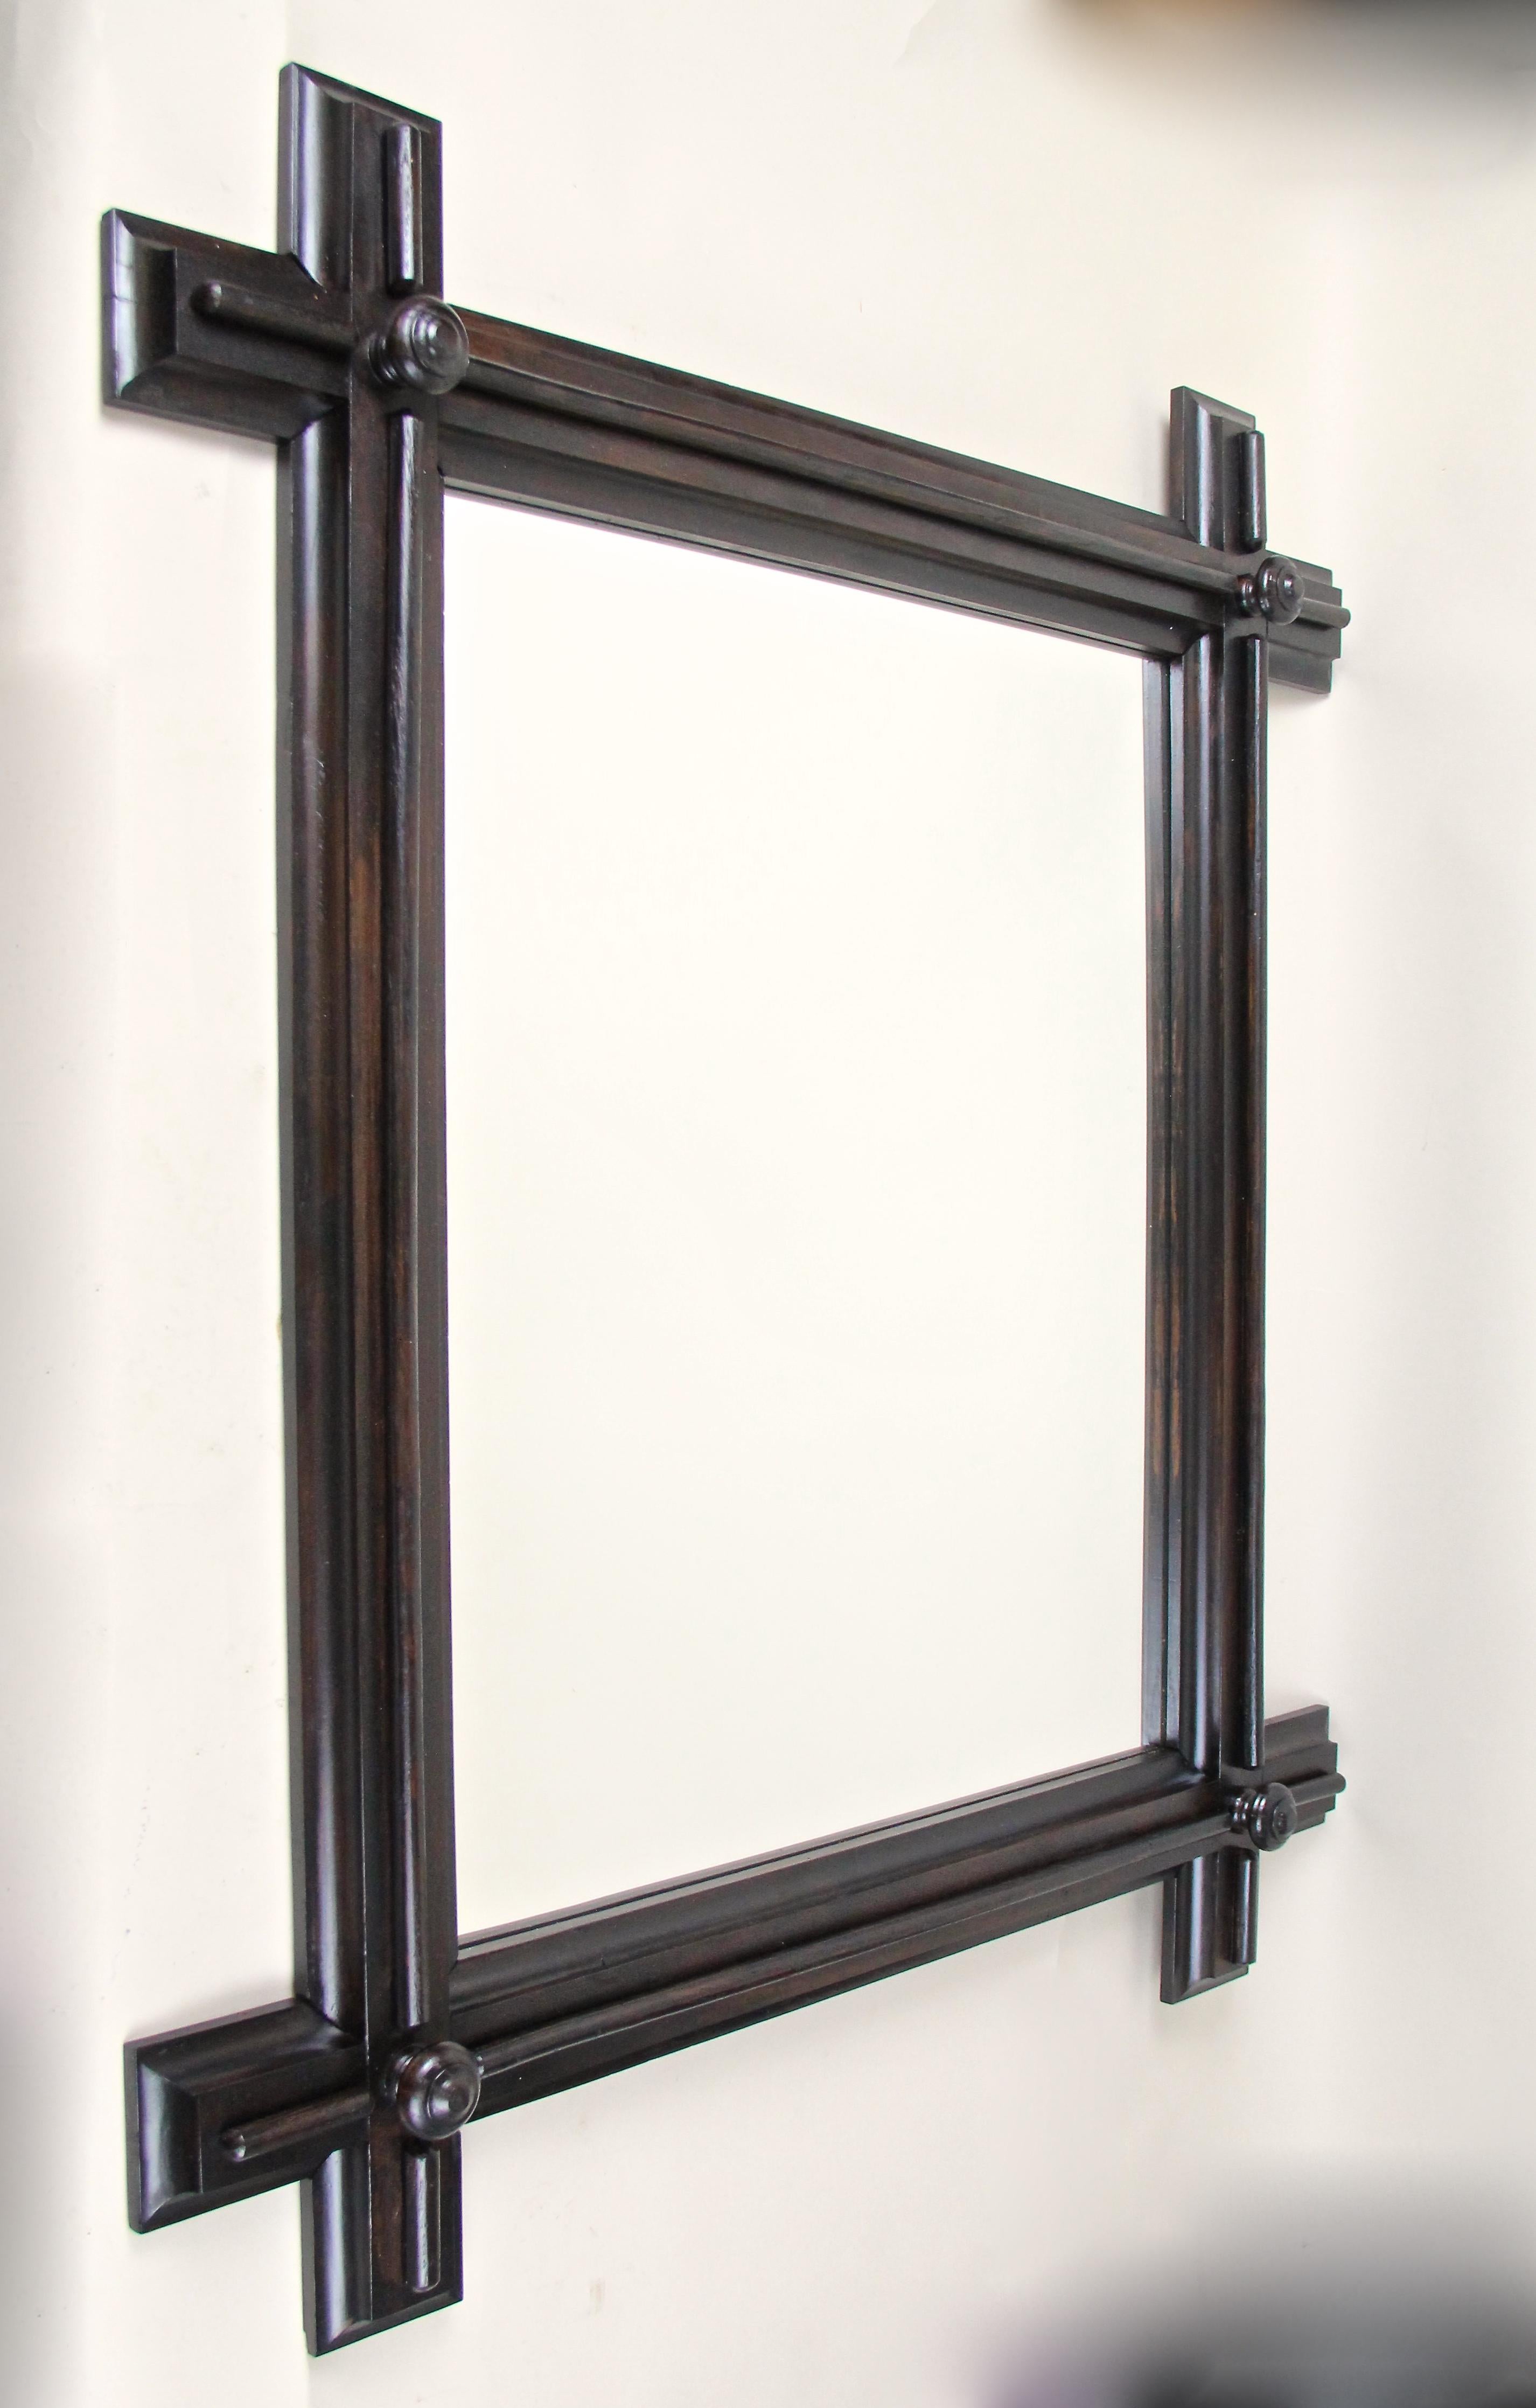 Late 19th century wall mirror made of fruitwood coming out of Austria, circa 1890. A simple but fantastic designed wall mirror from the so called 